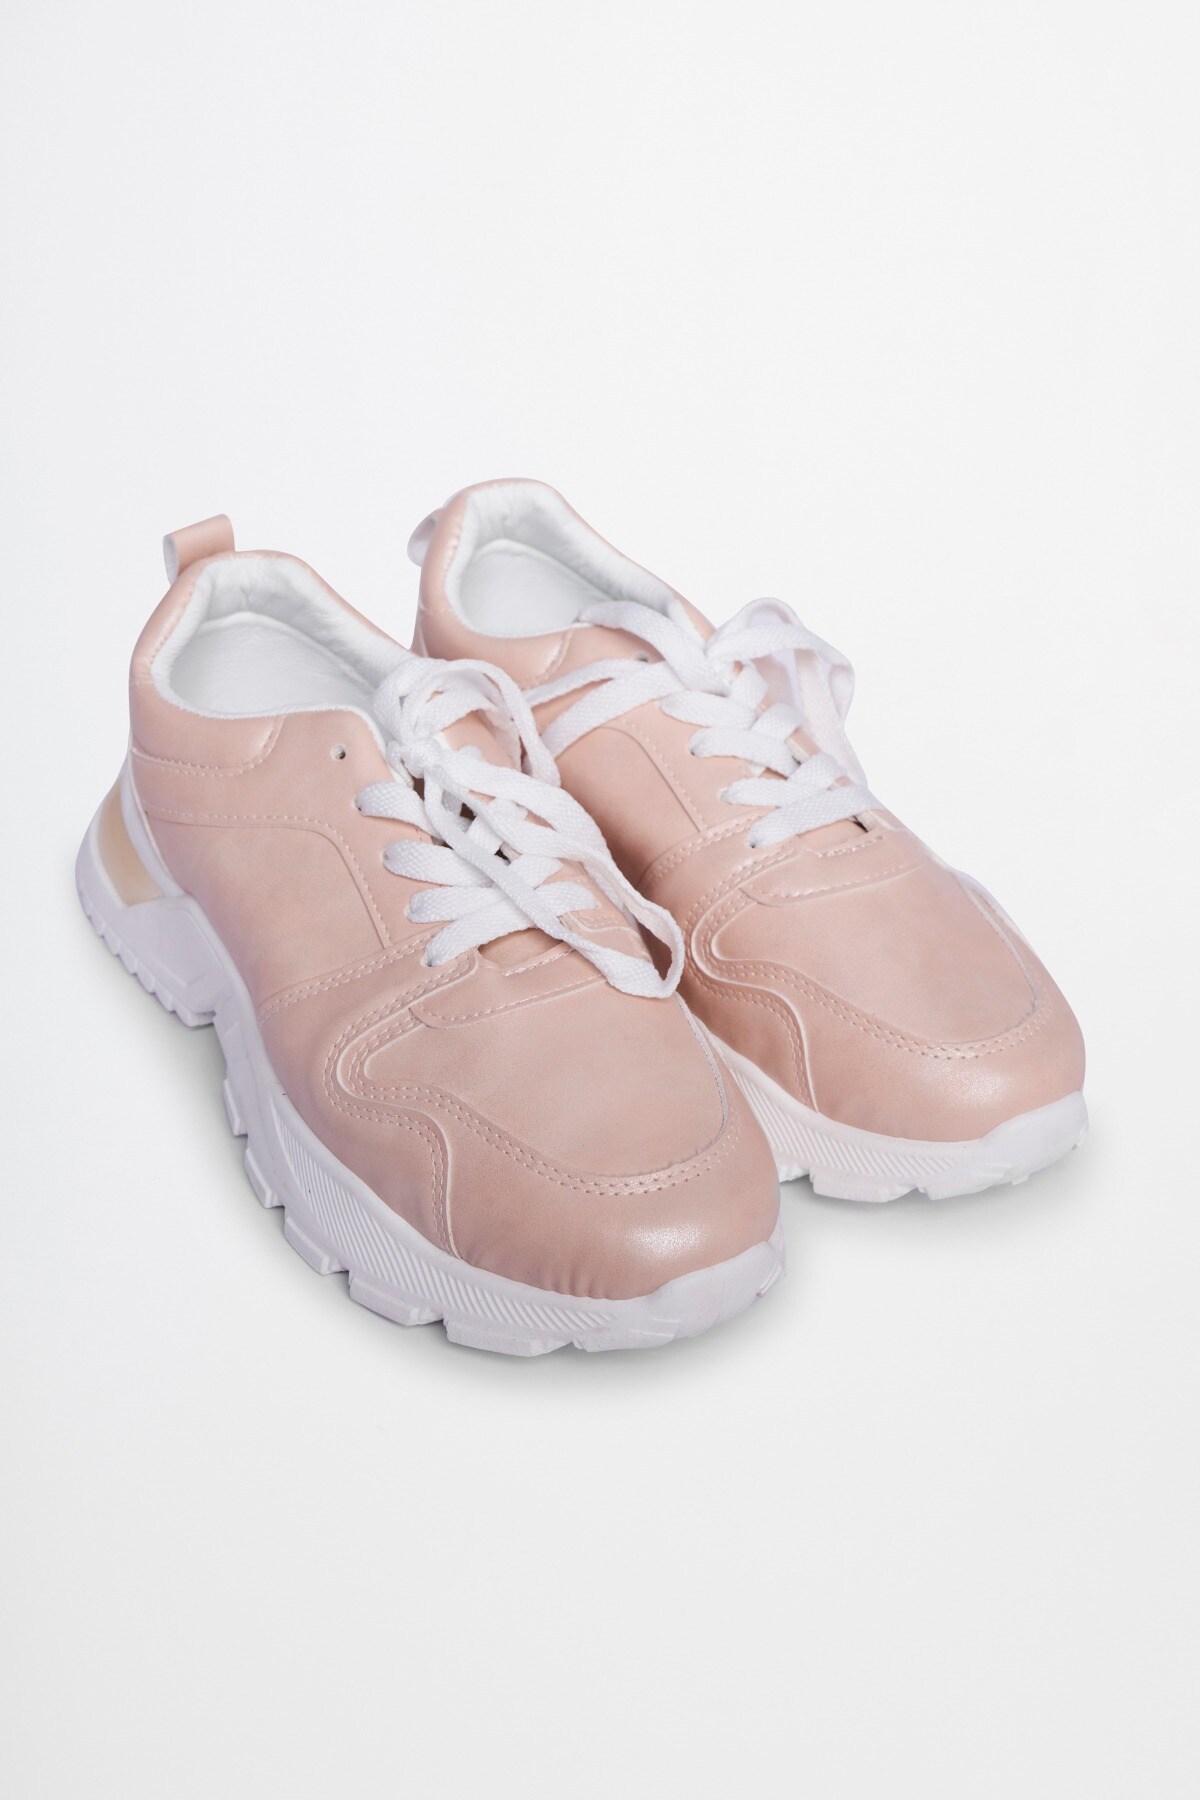 3 - Pink Shoes, image 1